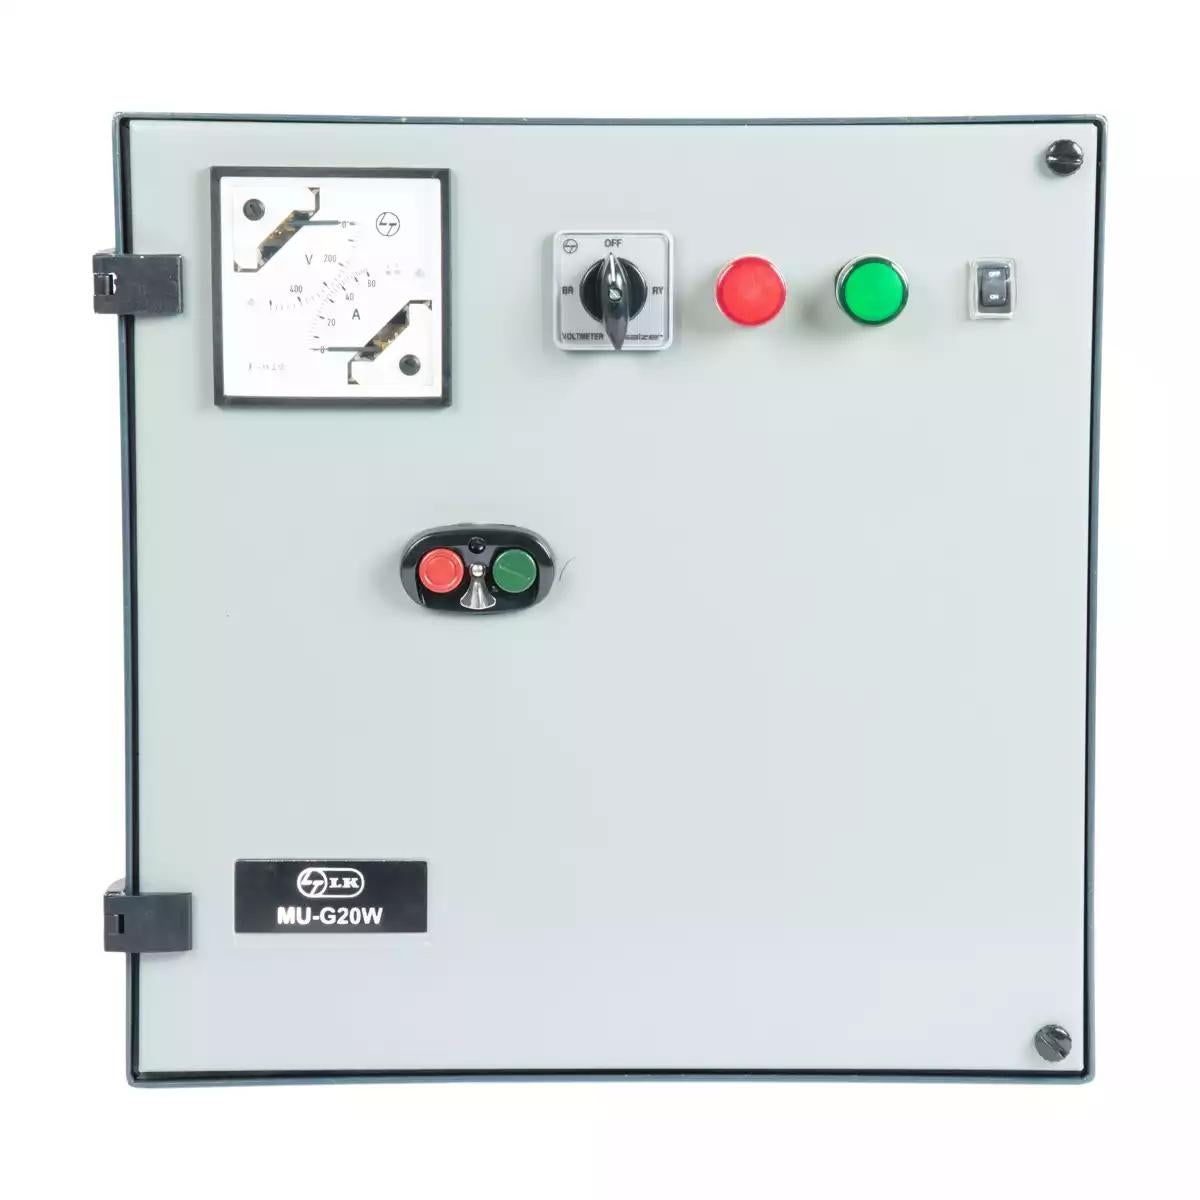 Three Phase Fully Automatic Star Delta Controller with WLC for Submersible Pump Application,MU-G20W,20HP,FASD (CS91038DOFO)